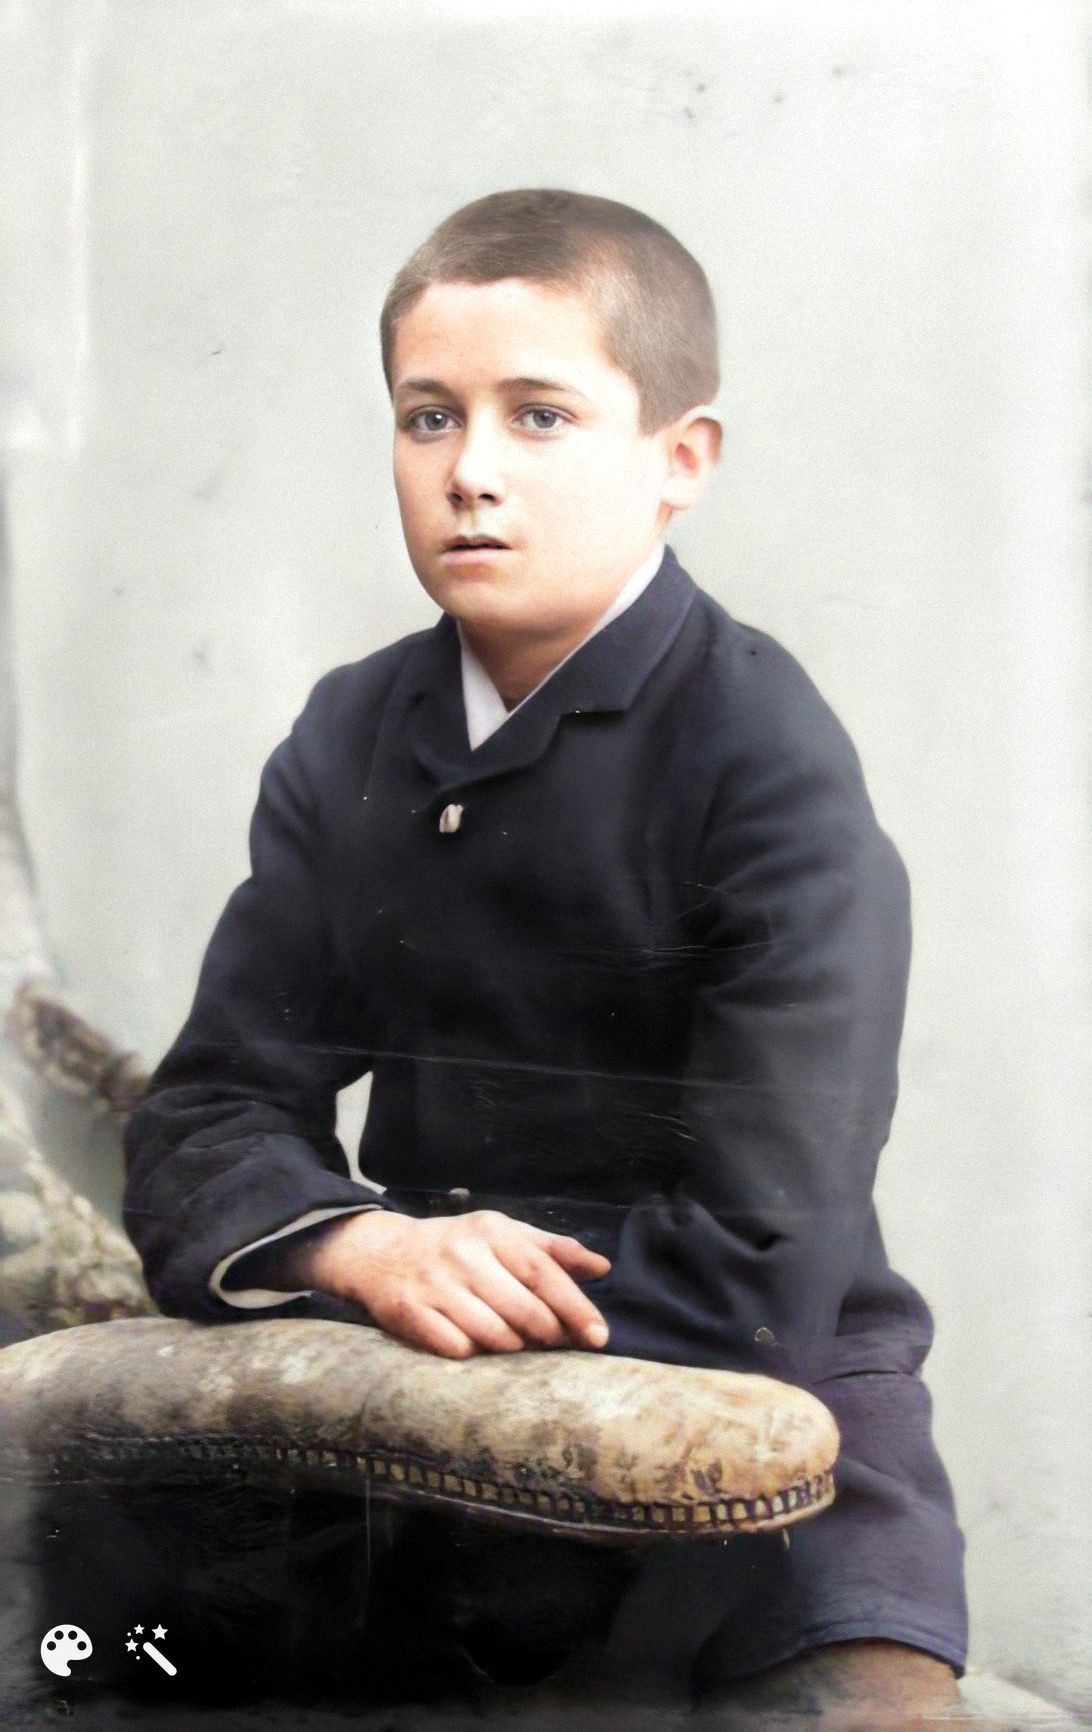 Alphonse Patureau. He died a war hero without ever seeing his father again. Photo colorized and enhanced by MyHeritage.